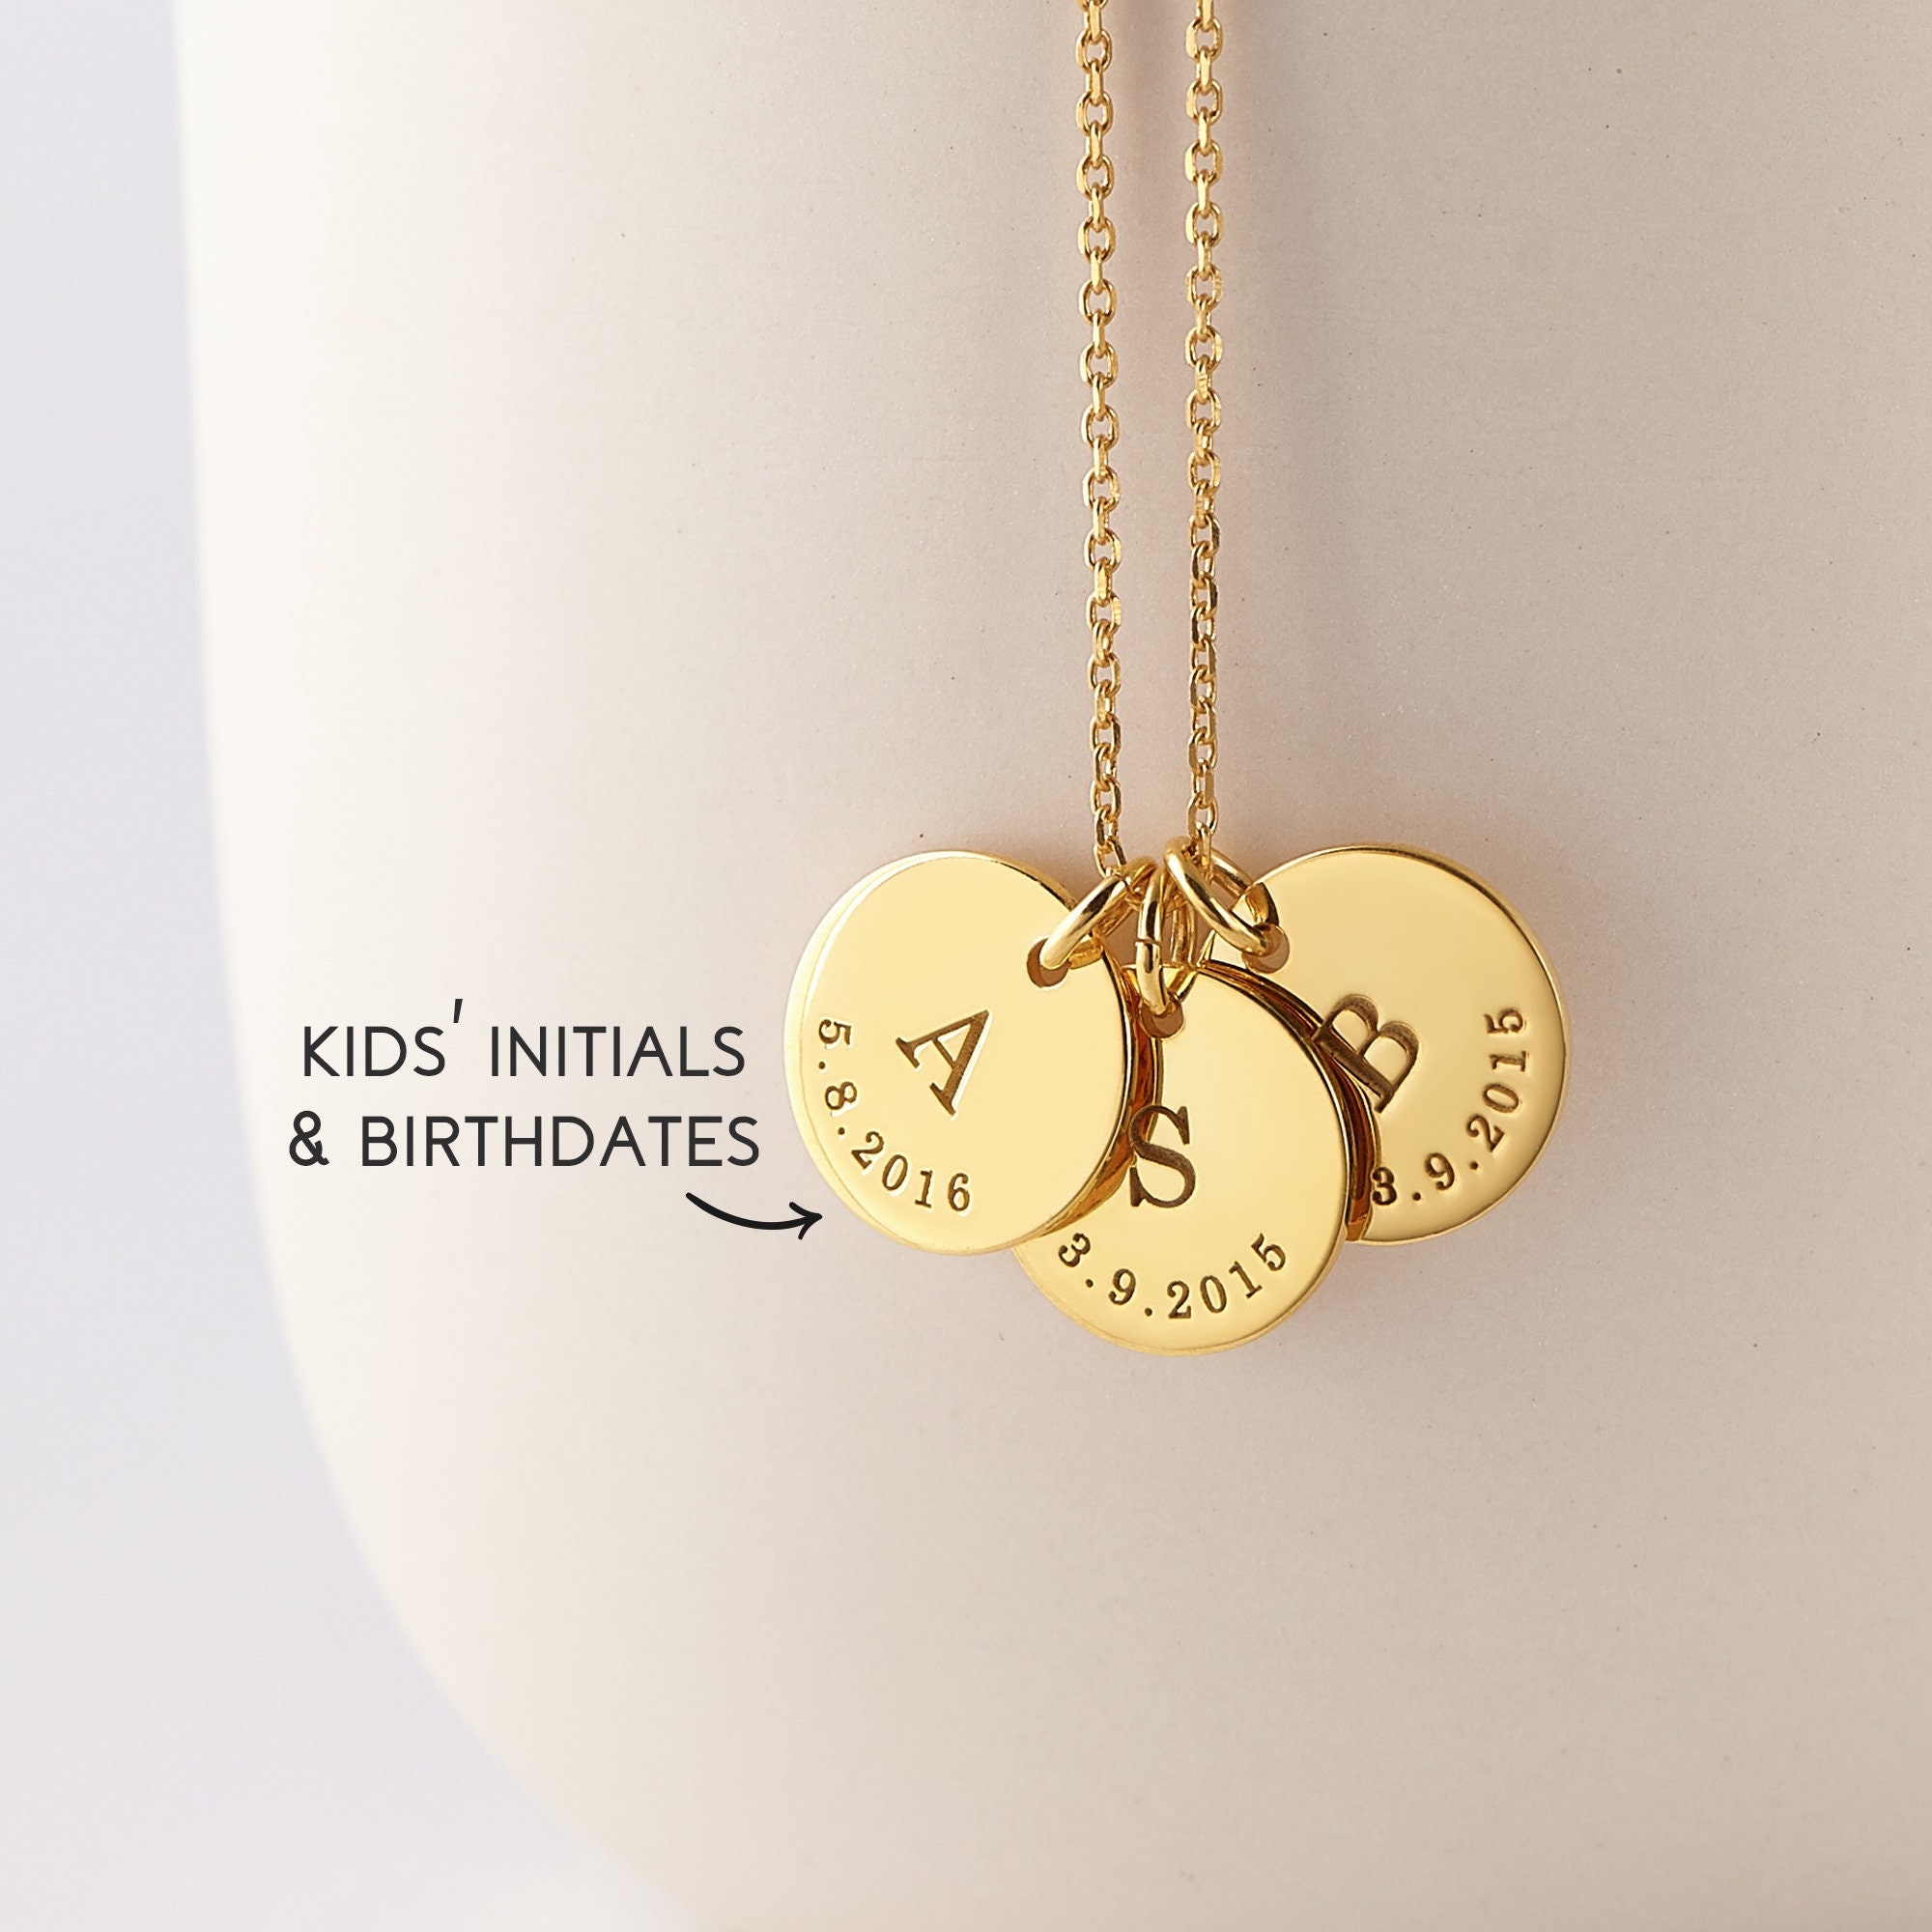 Kate Middleton Wears Necklace With Kids Initials | Newspix International